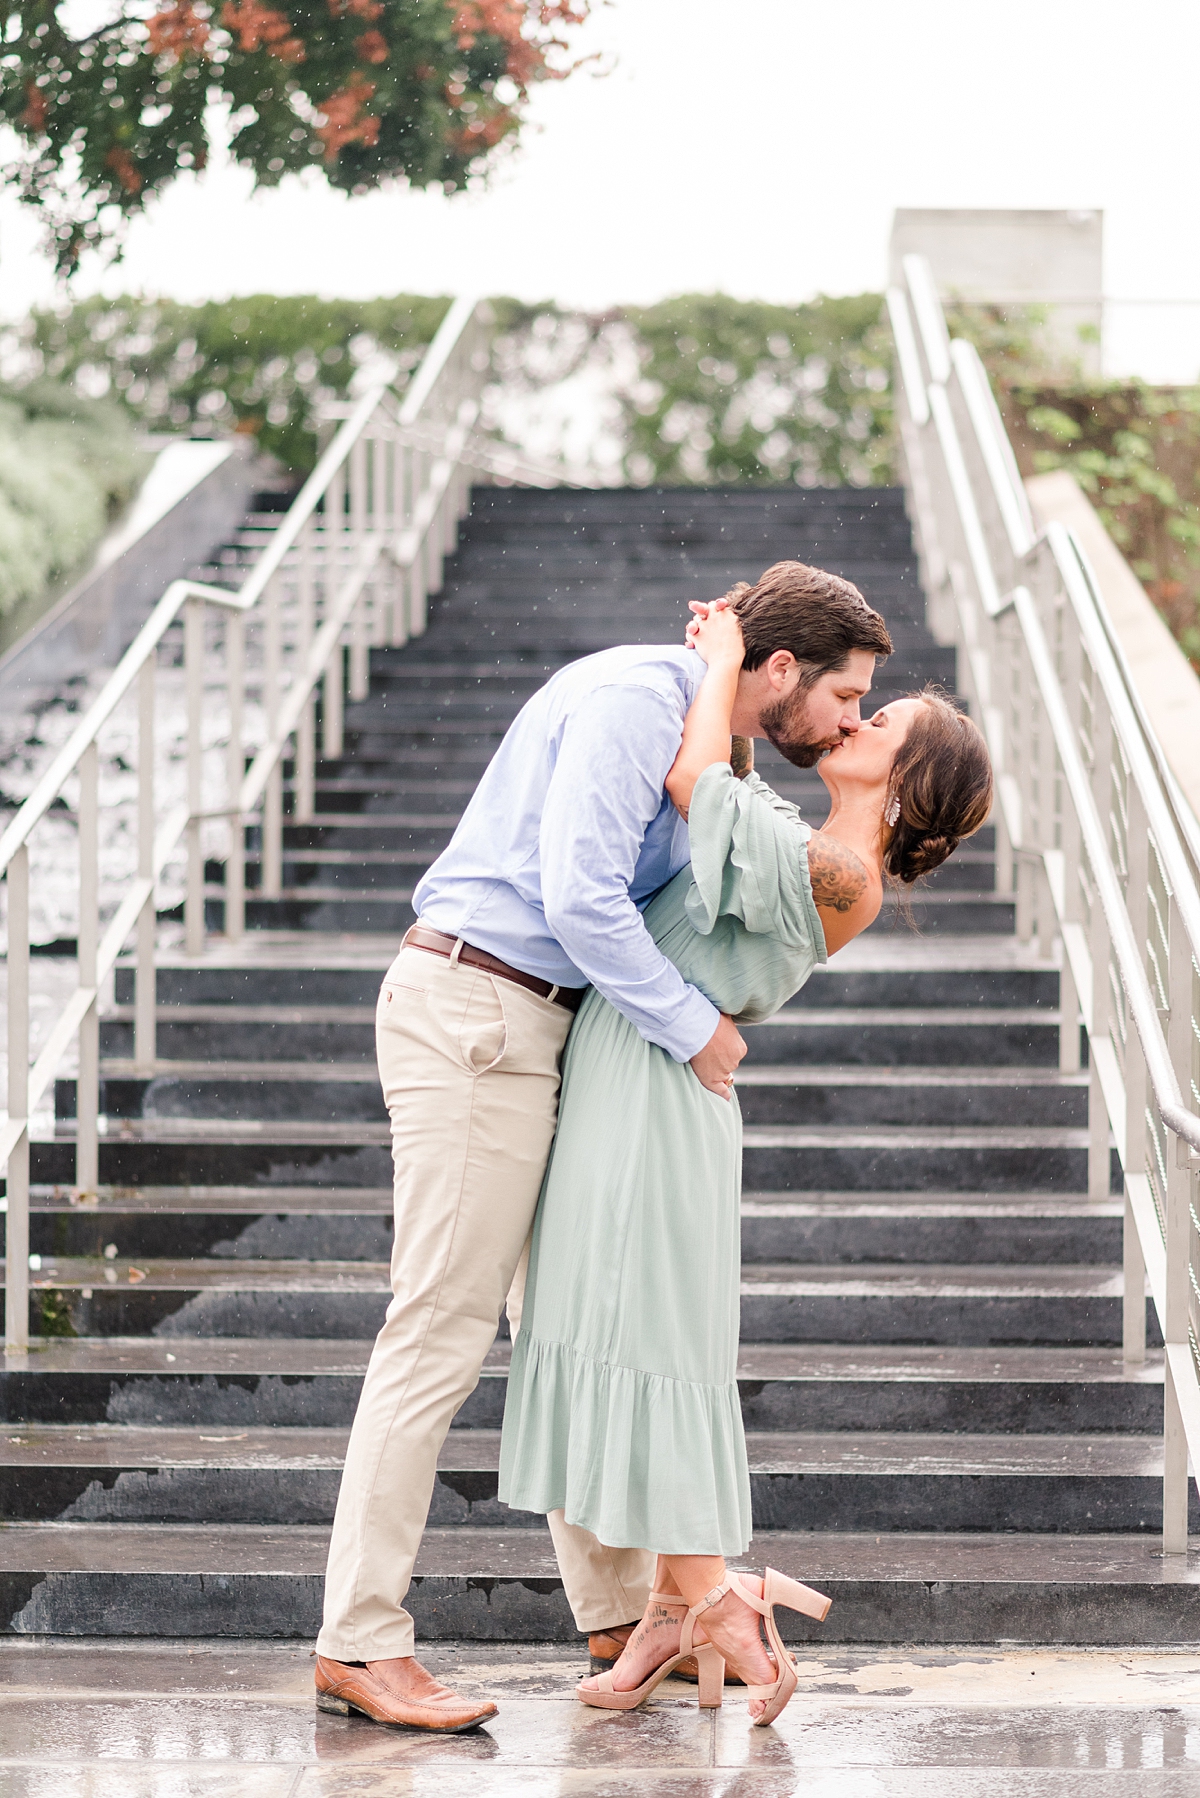 Dip Kiss by Fountain Steps at Virginia Museum of Fine Arts Rainy Summer Engagement Session. Engagement Photography by Richmond Wedding Photographer Kailey Brianne Photography. 